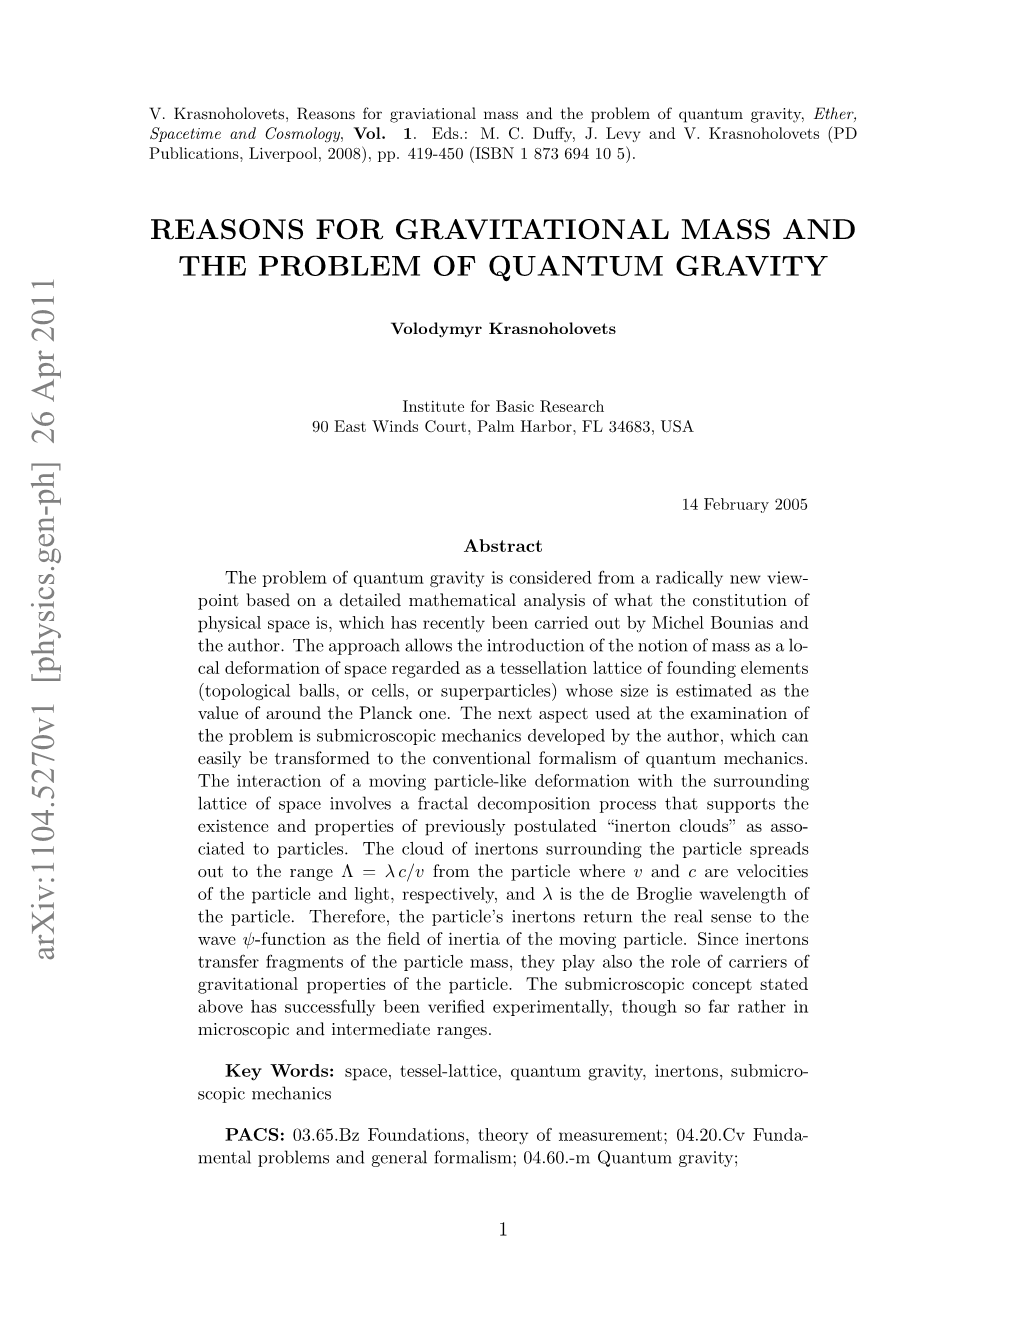 Reasons for Gravitational Mass and the Problem of Quantum Gravity